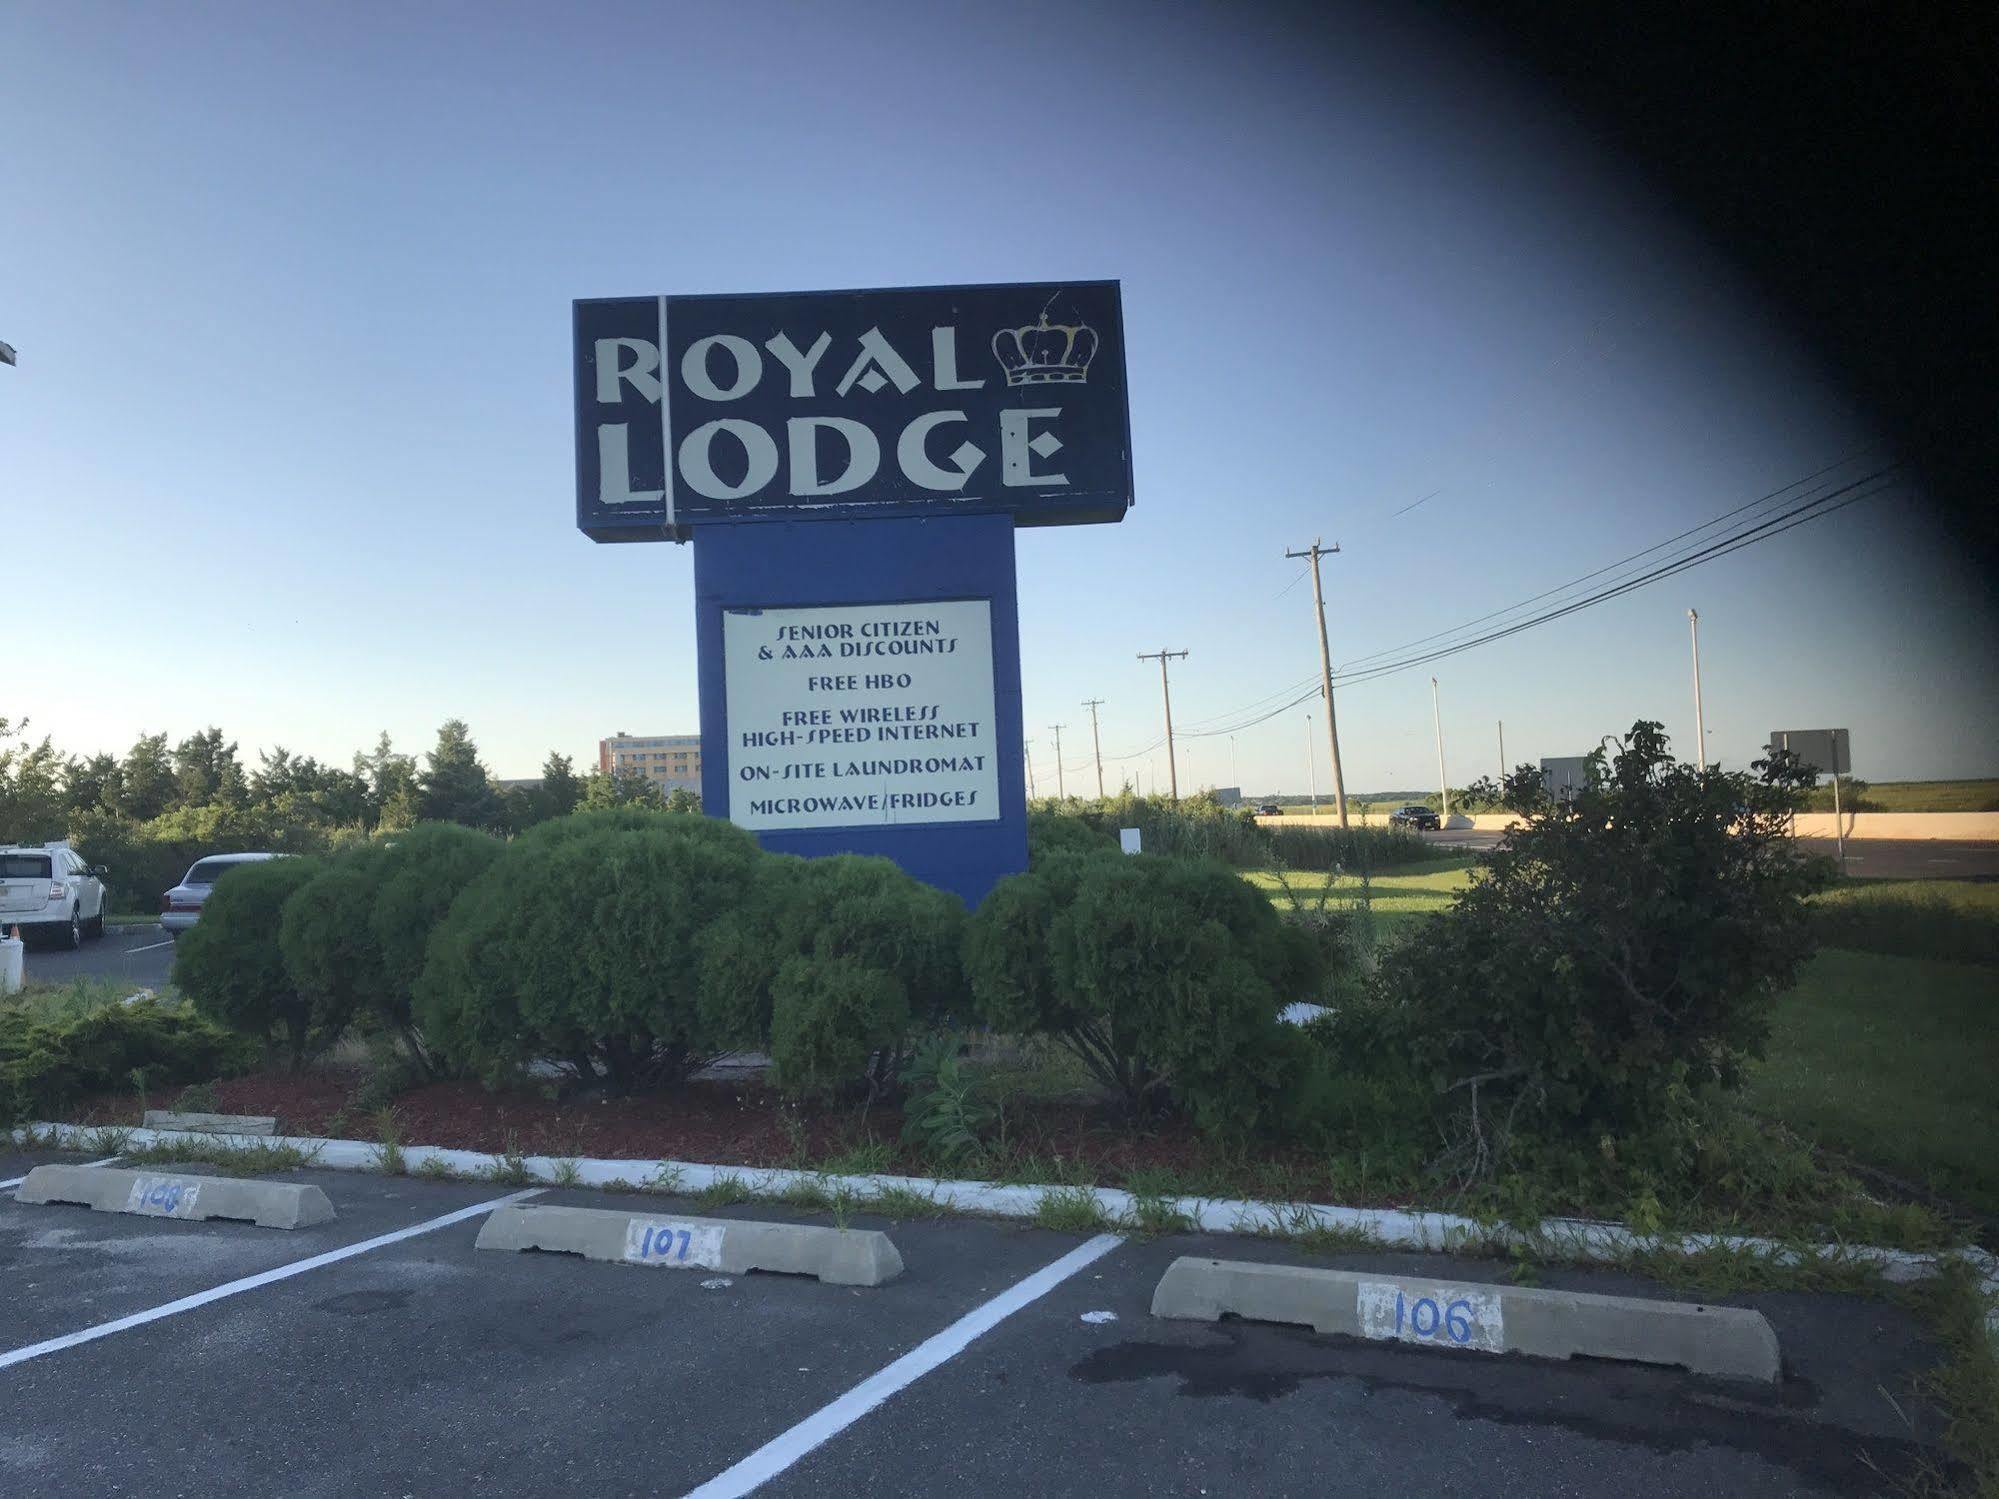 Royal Lodge Absecon Exterior photo